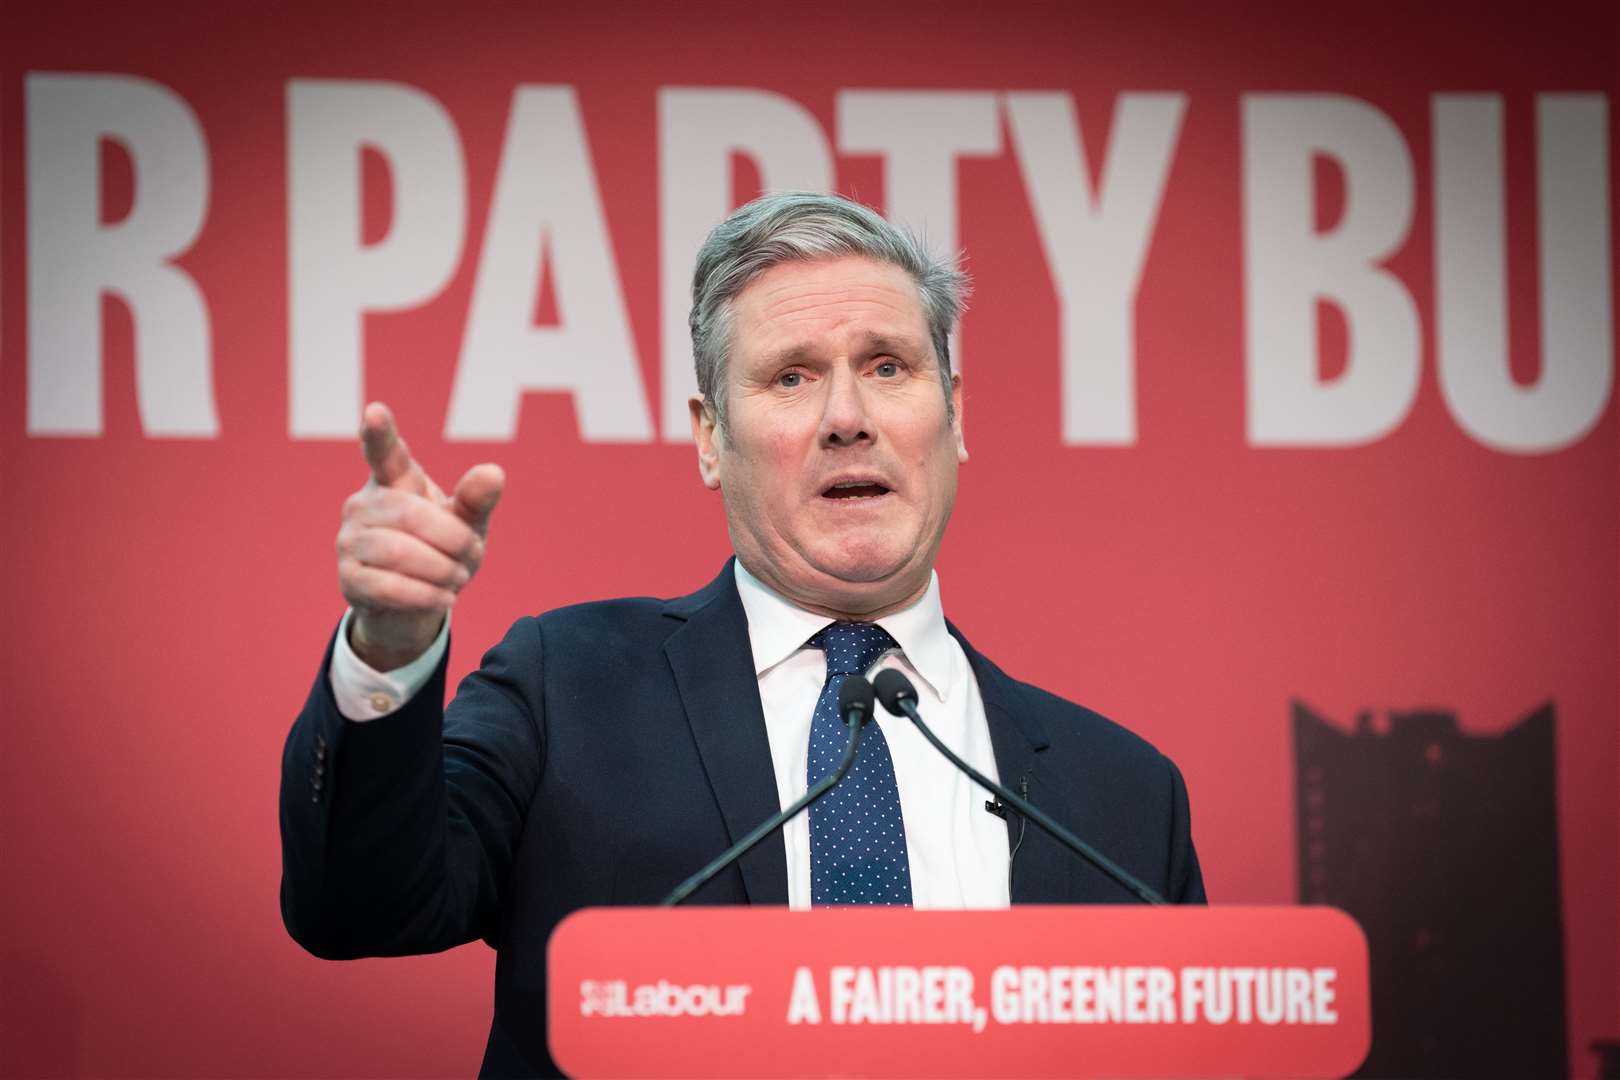 Labour leader Sir Keir Starmer said the UK needs change in 2023, in his New Year message to the public (Stefan Rousseau/PA)